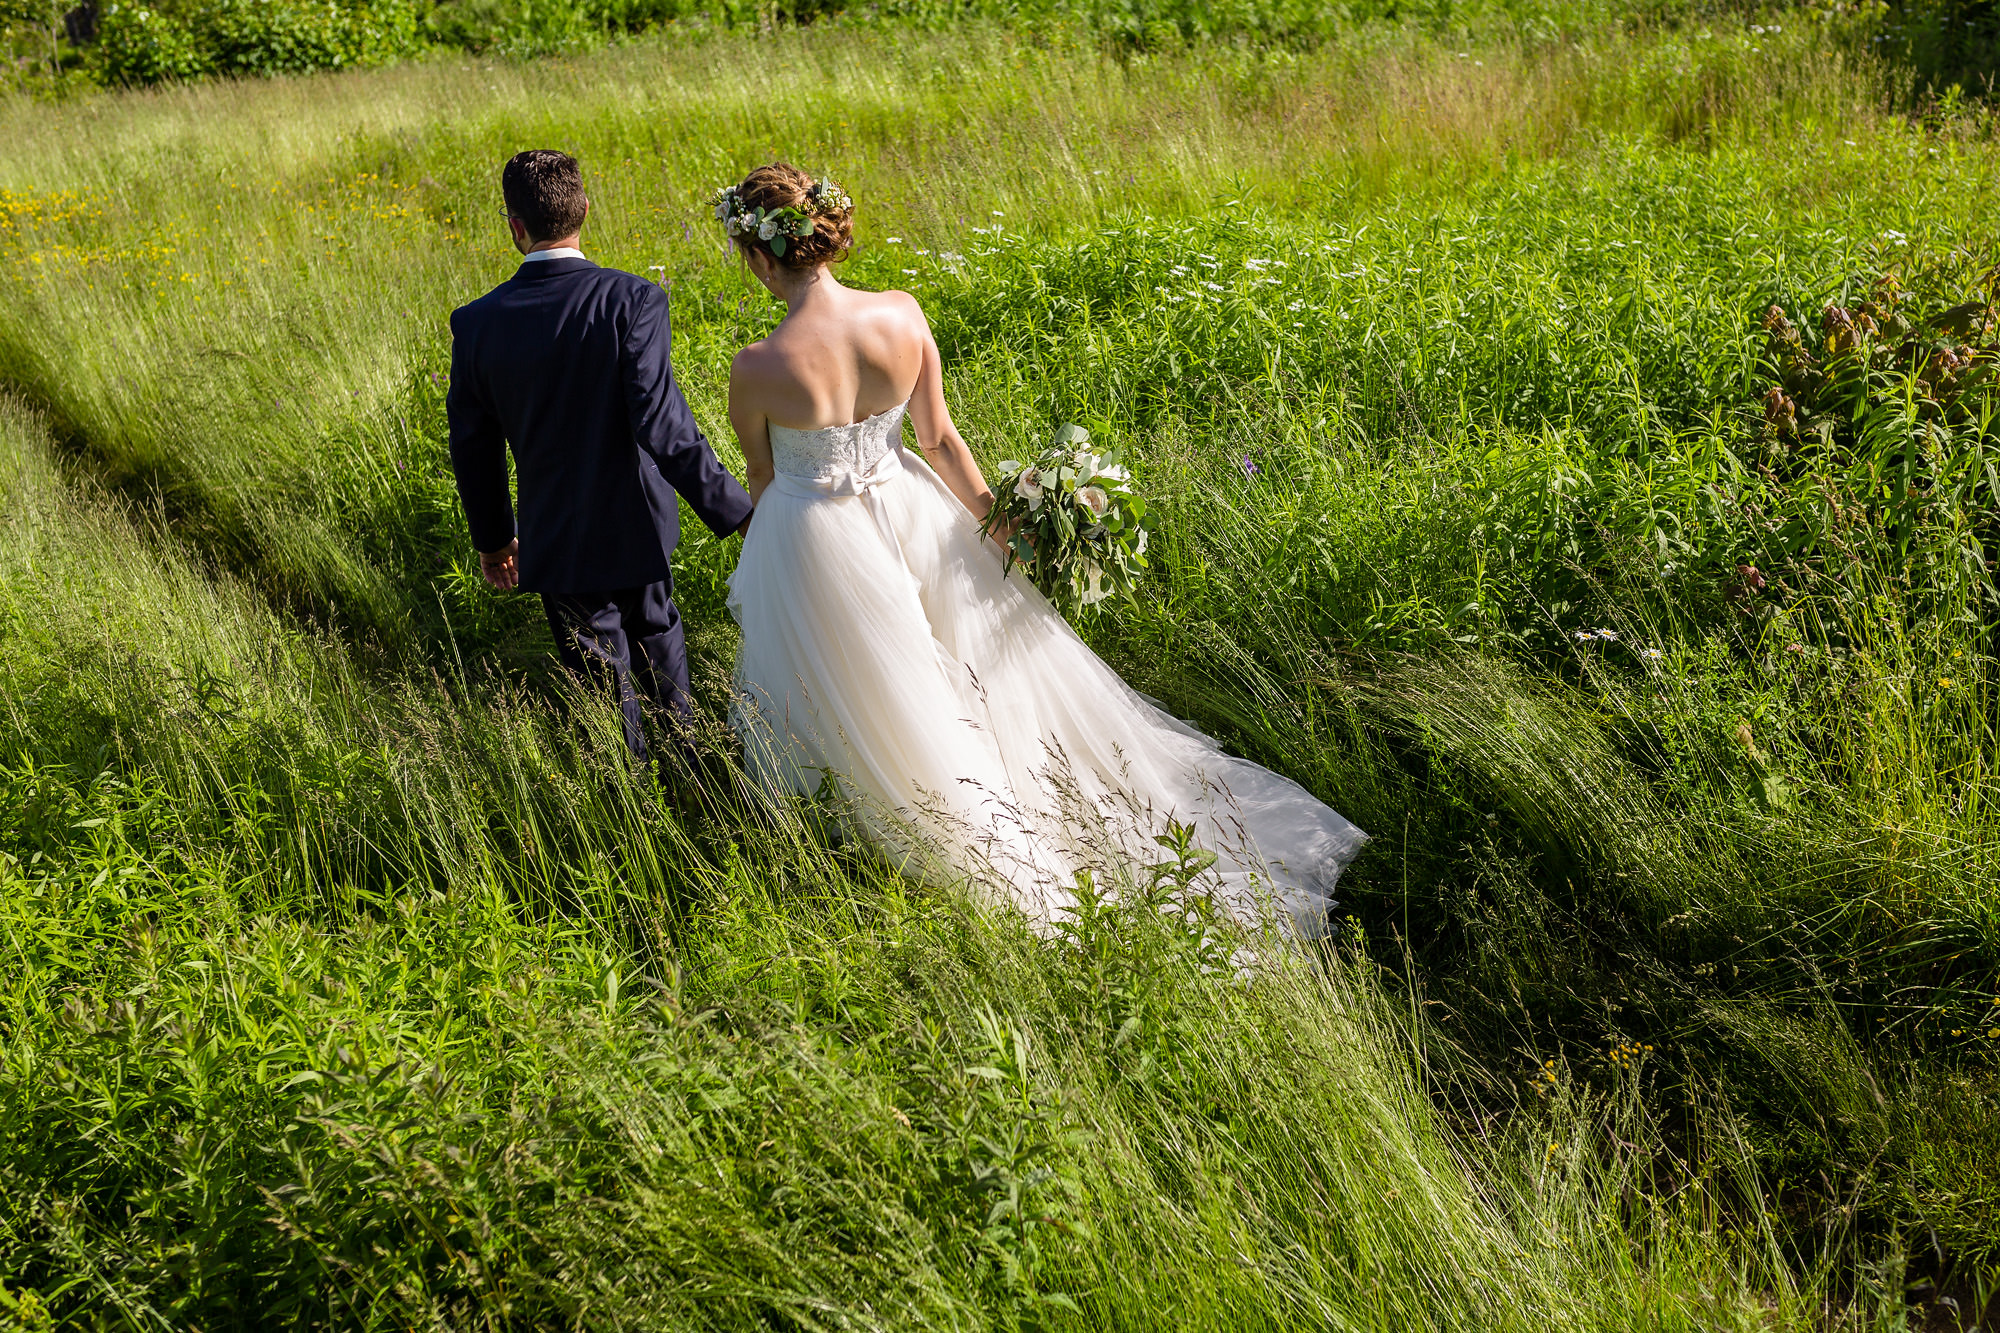 Beautiful wedding portraits taken on the Point Lookout property in Northport, Maine